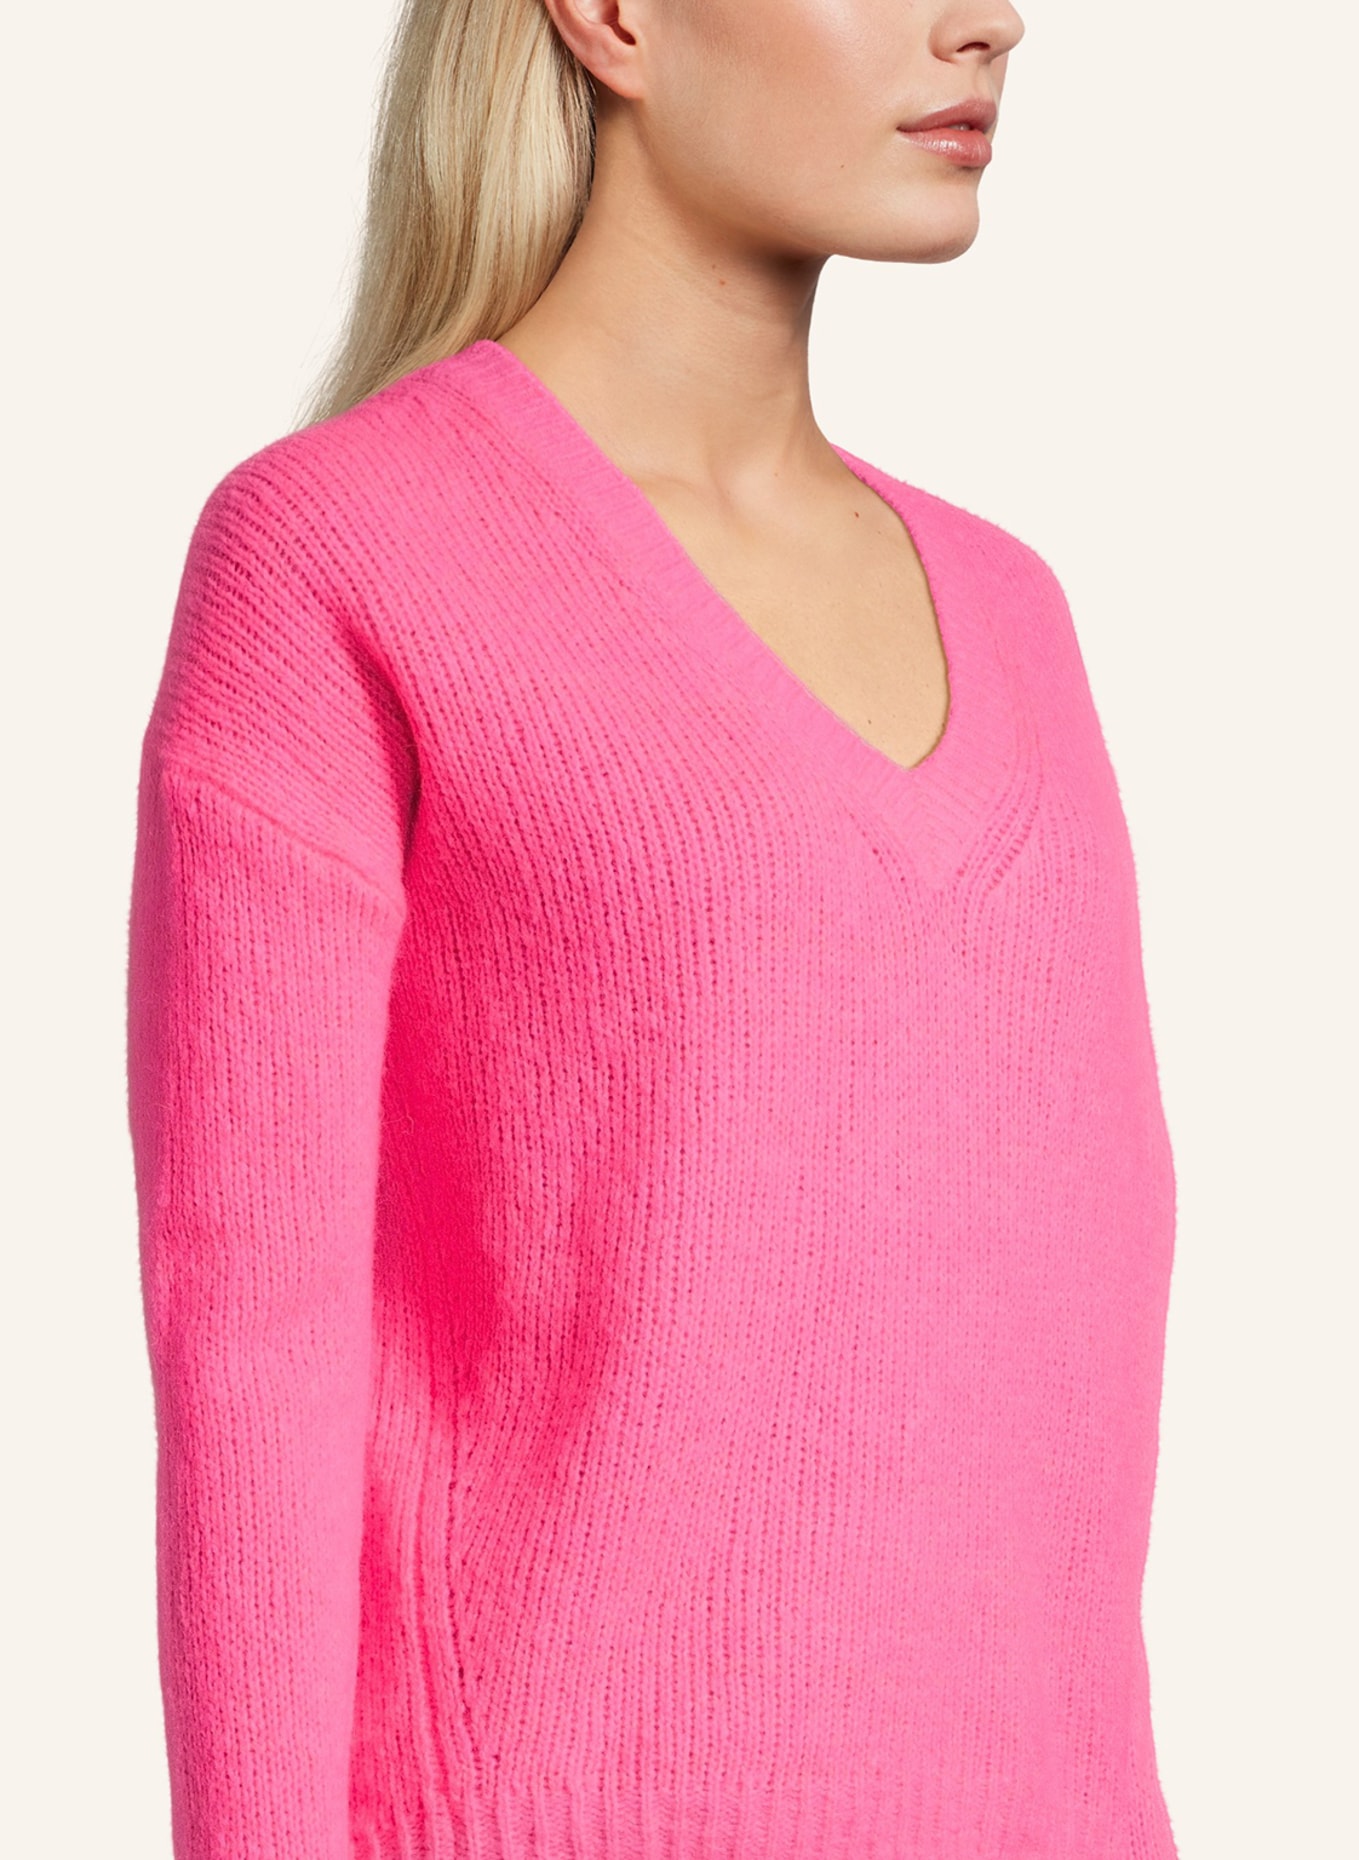 Princess GOES HOLLYWOOD Pullover mit Merinowolle, Farbe: PINK (Bild 3)